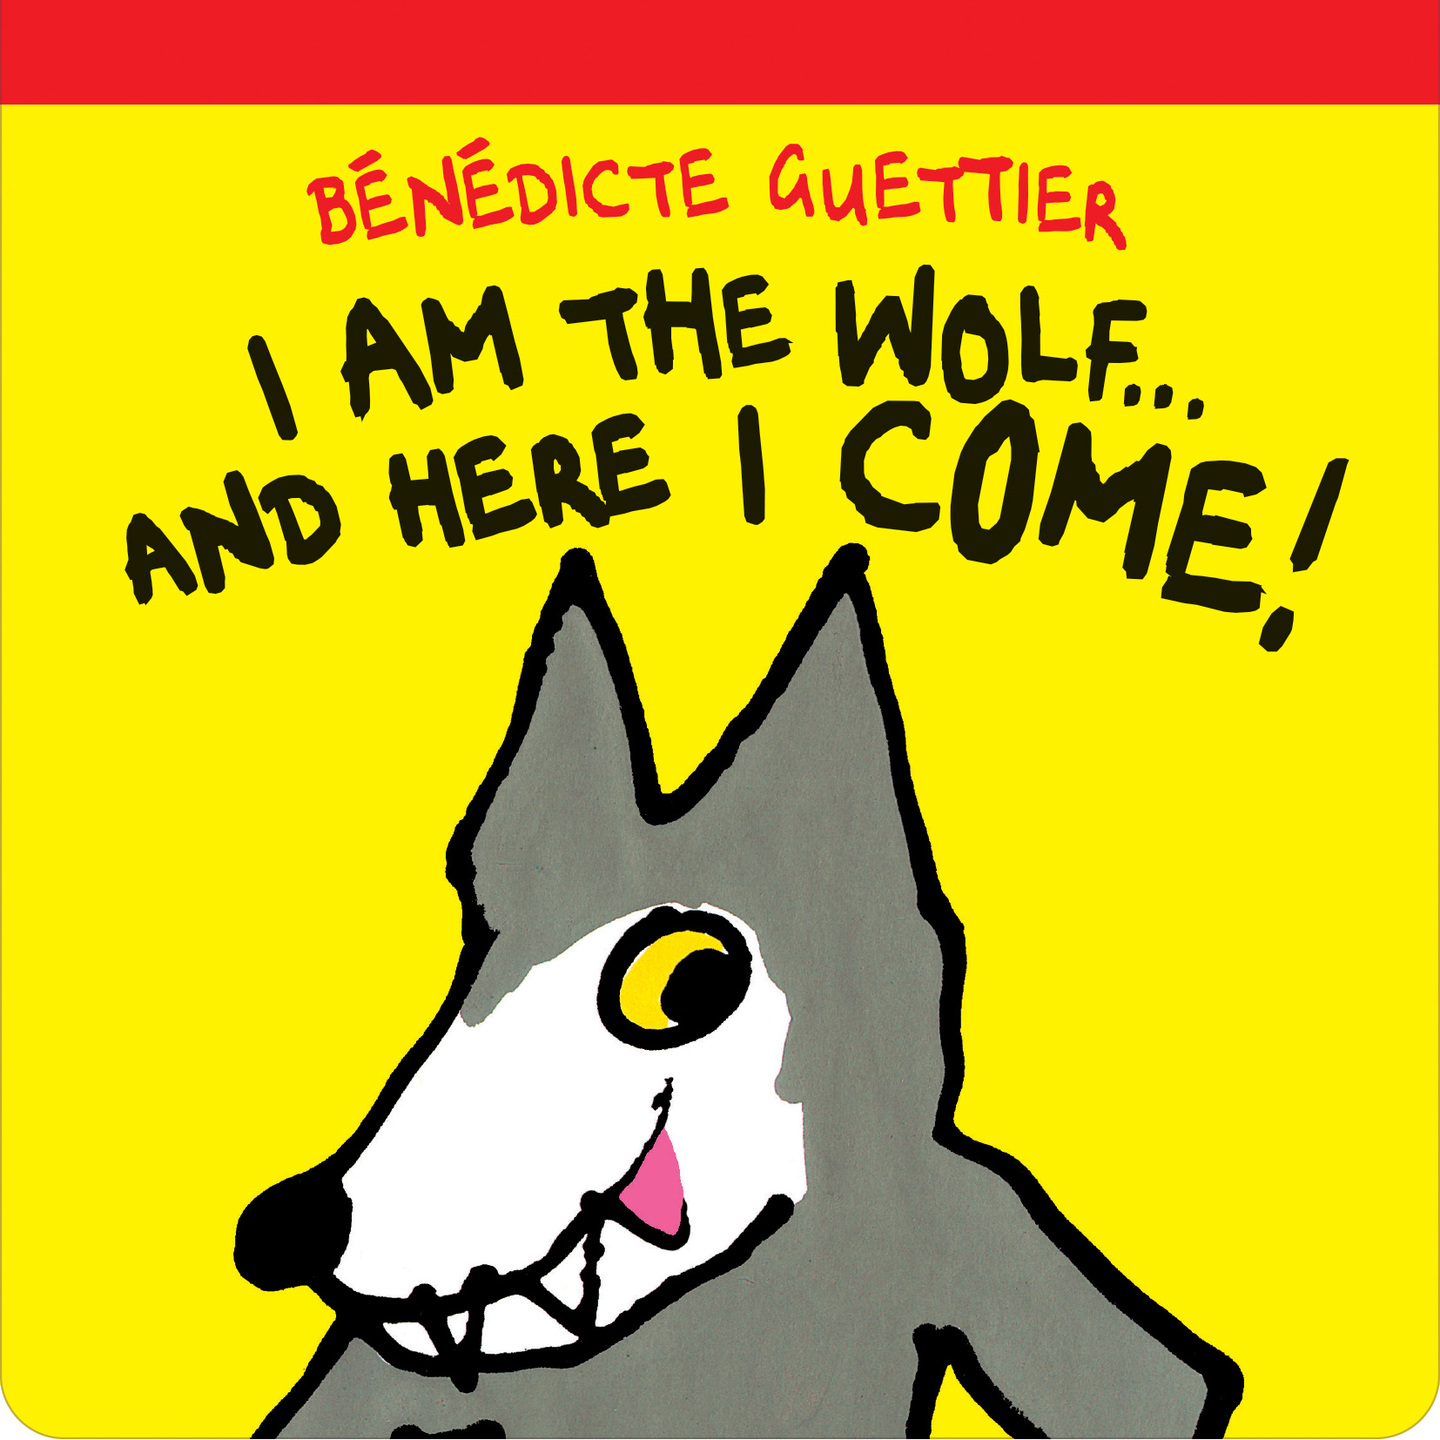 I am the wolf and here I come book, Benedicte Guettier, book for toddlers, boardbook for babies